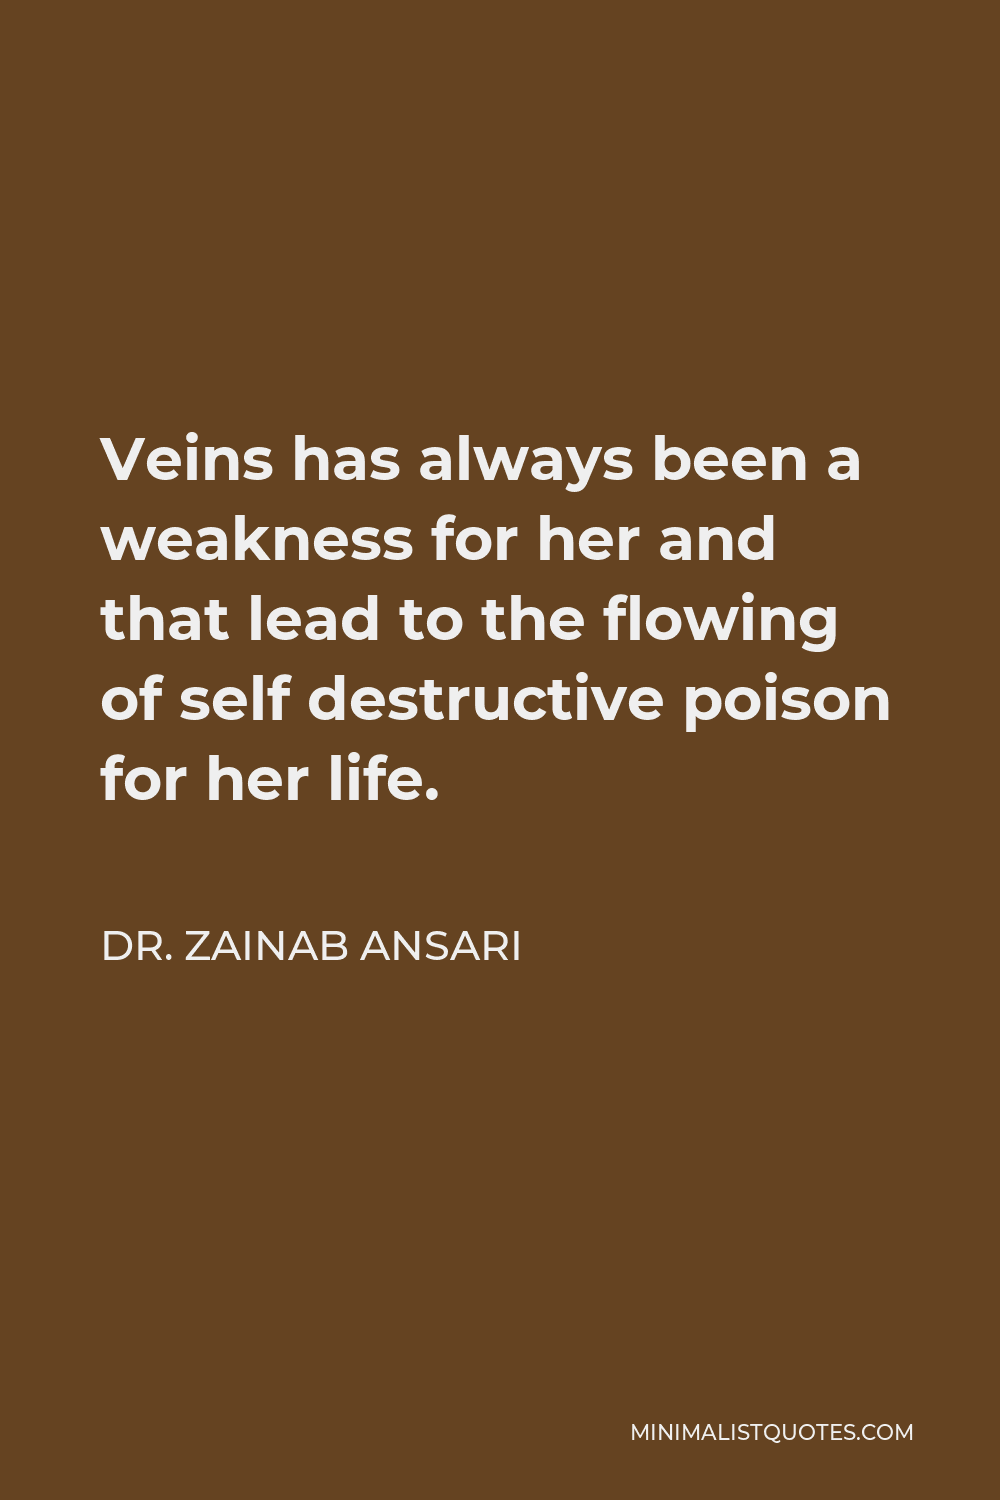 Dr. Zainab Ansari Quote - Veins has always been a weakness for her and that lead to the flowing of self destructive poison for her life.